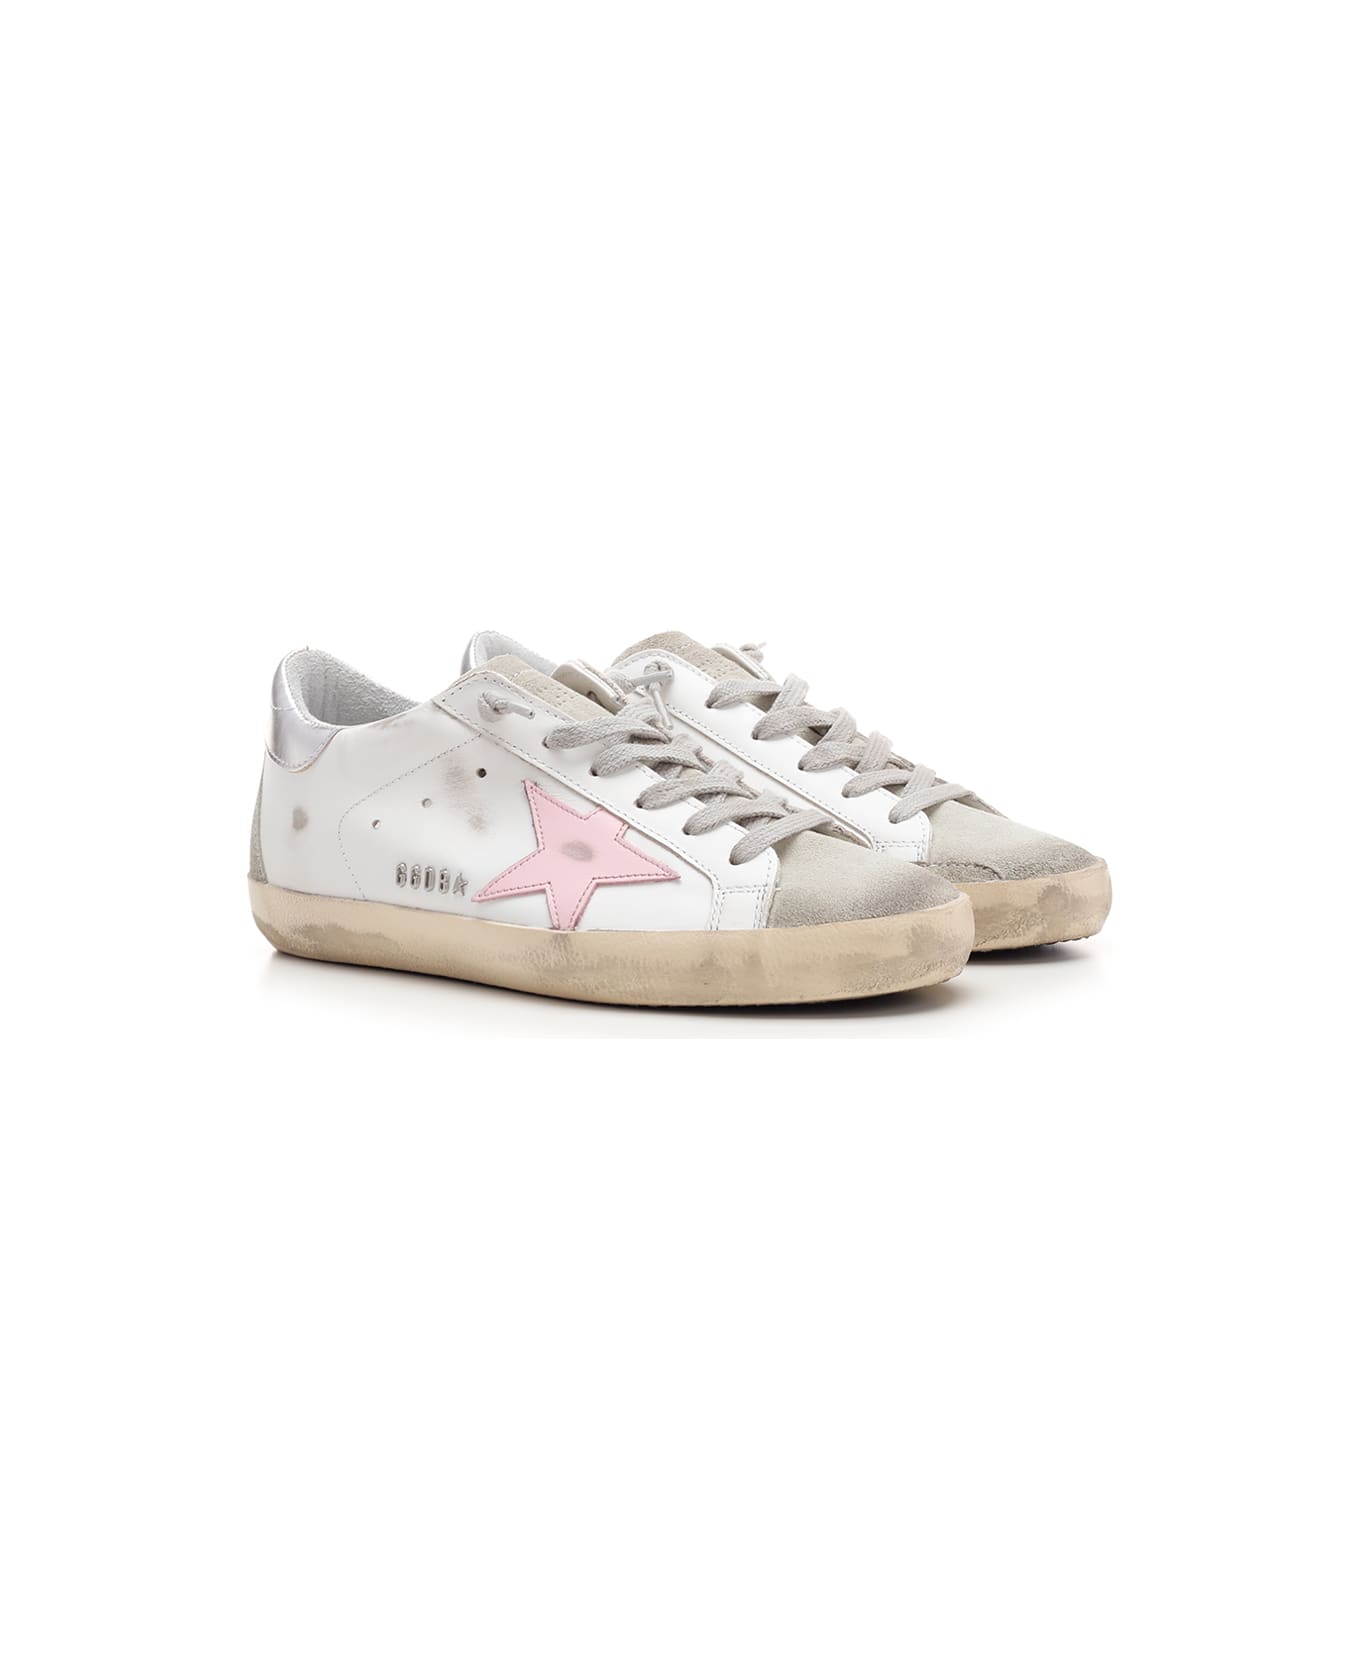 Golden Goose Super-star Leather Upper And Star Suede Toe And Spur Laminated Heel Metal Lettering - White/Ice/Orchid Pink/Silver スニーカー